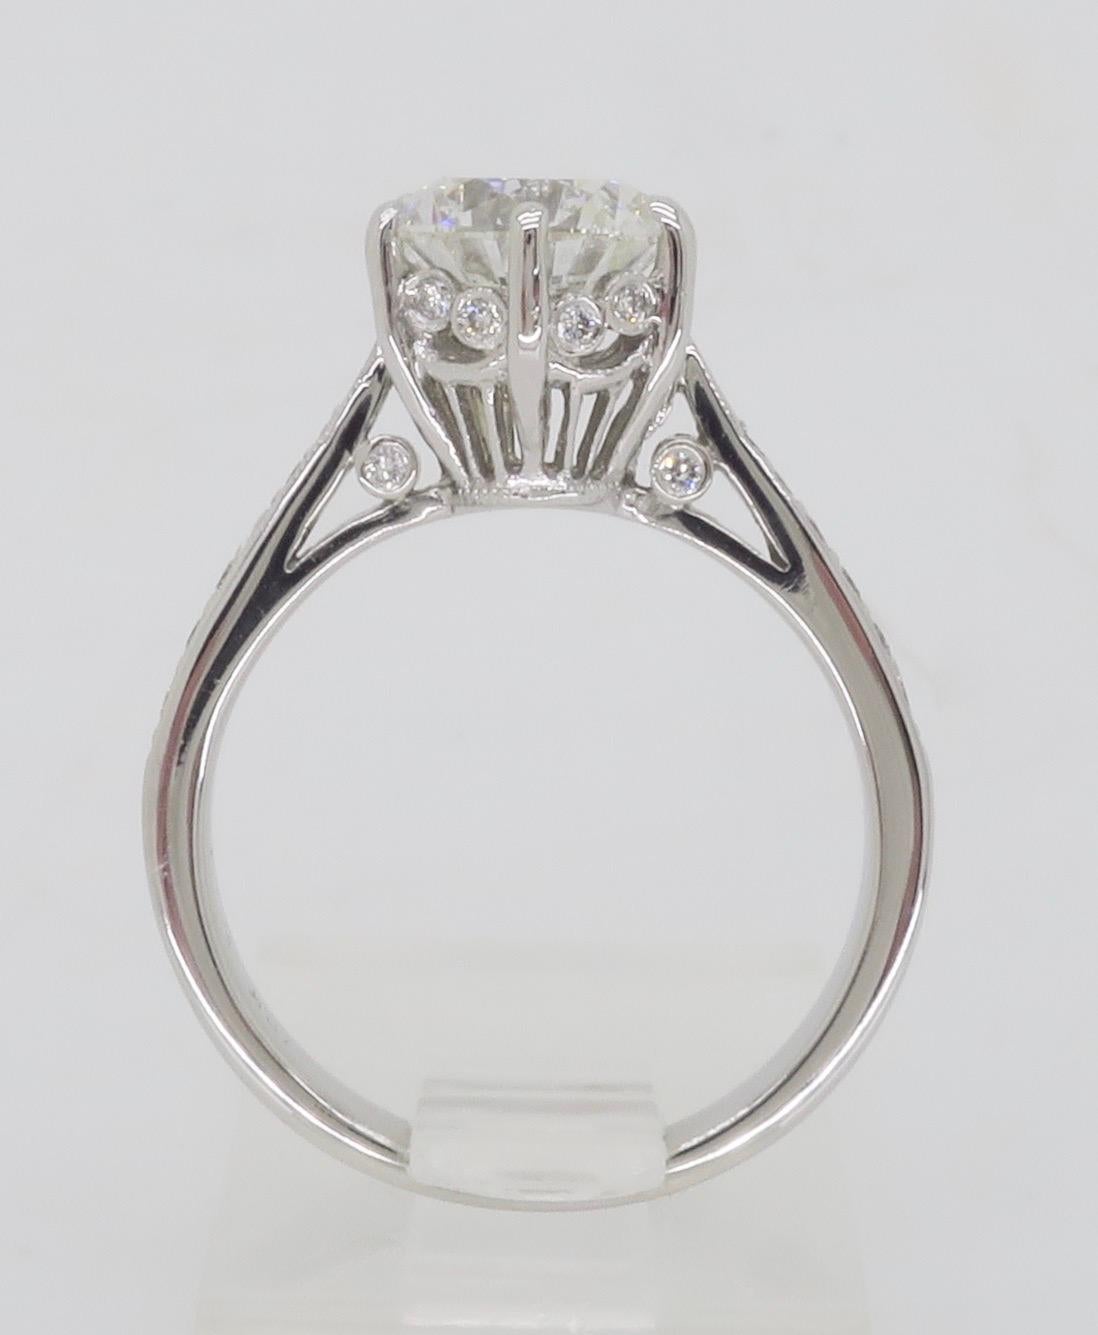 1.89ctw Diamond Engagement Ring in 18k White Gold  For Sale 5